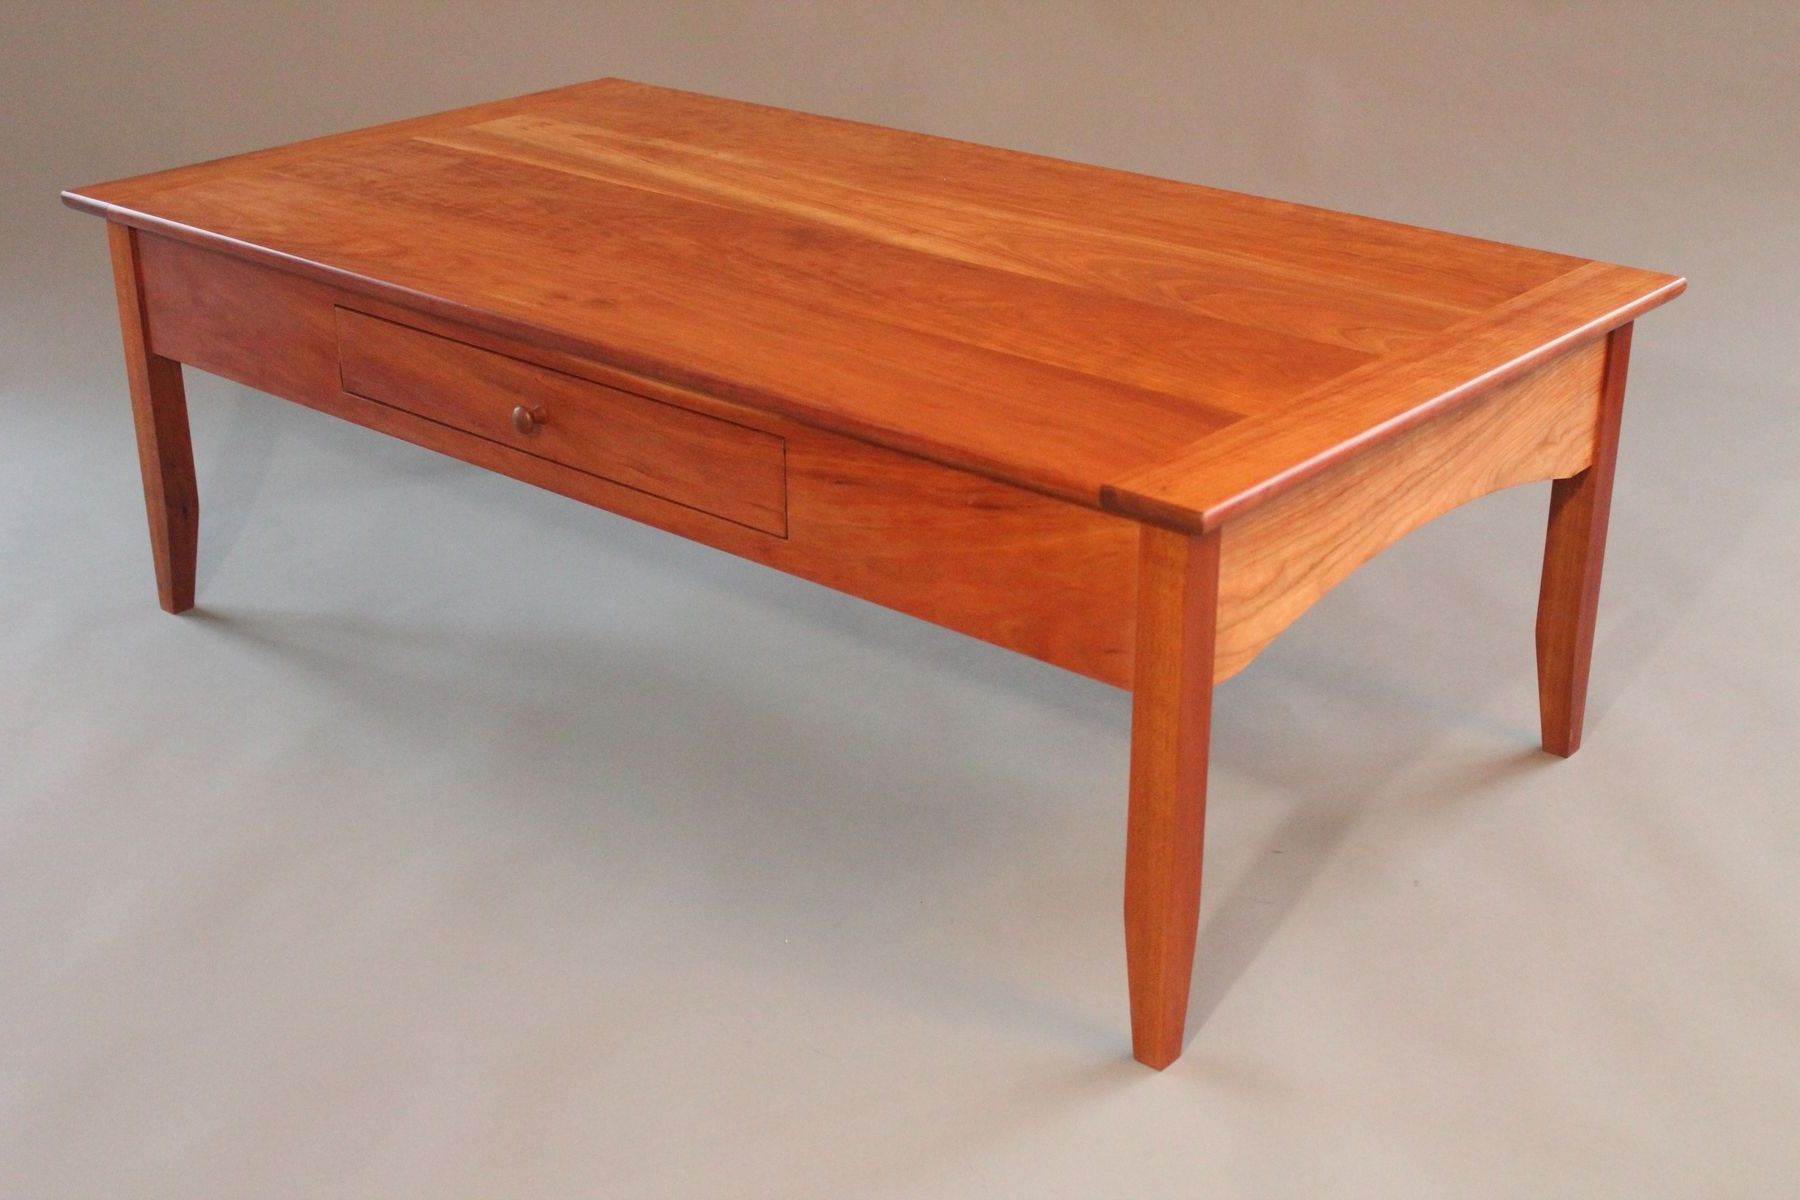 Custommade Intended For Heartwood Cherry Wood Coffee Tables (View 3 of 10)